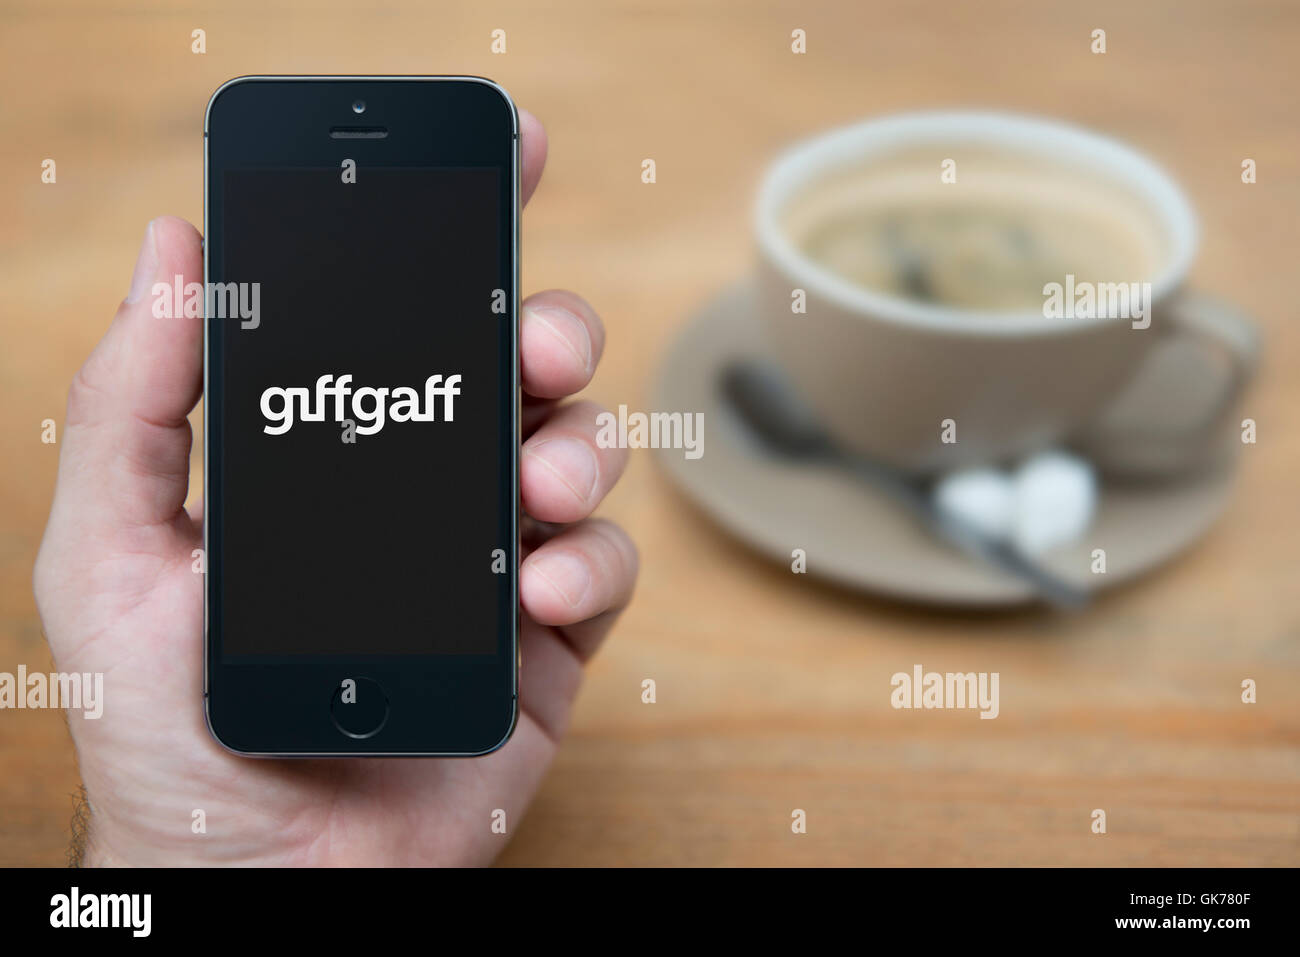 A man looks at his iPhone which displays the Giff Gaff Mobile logo, while sat with a cup of coffee (Editorial use only). Stock Photo